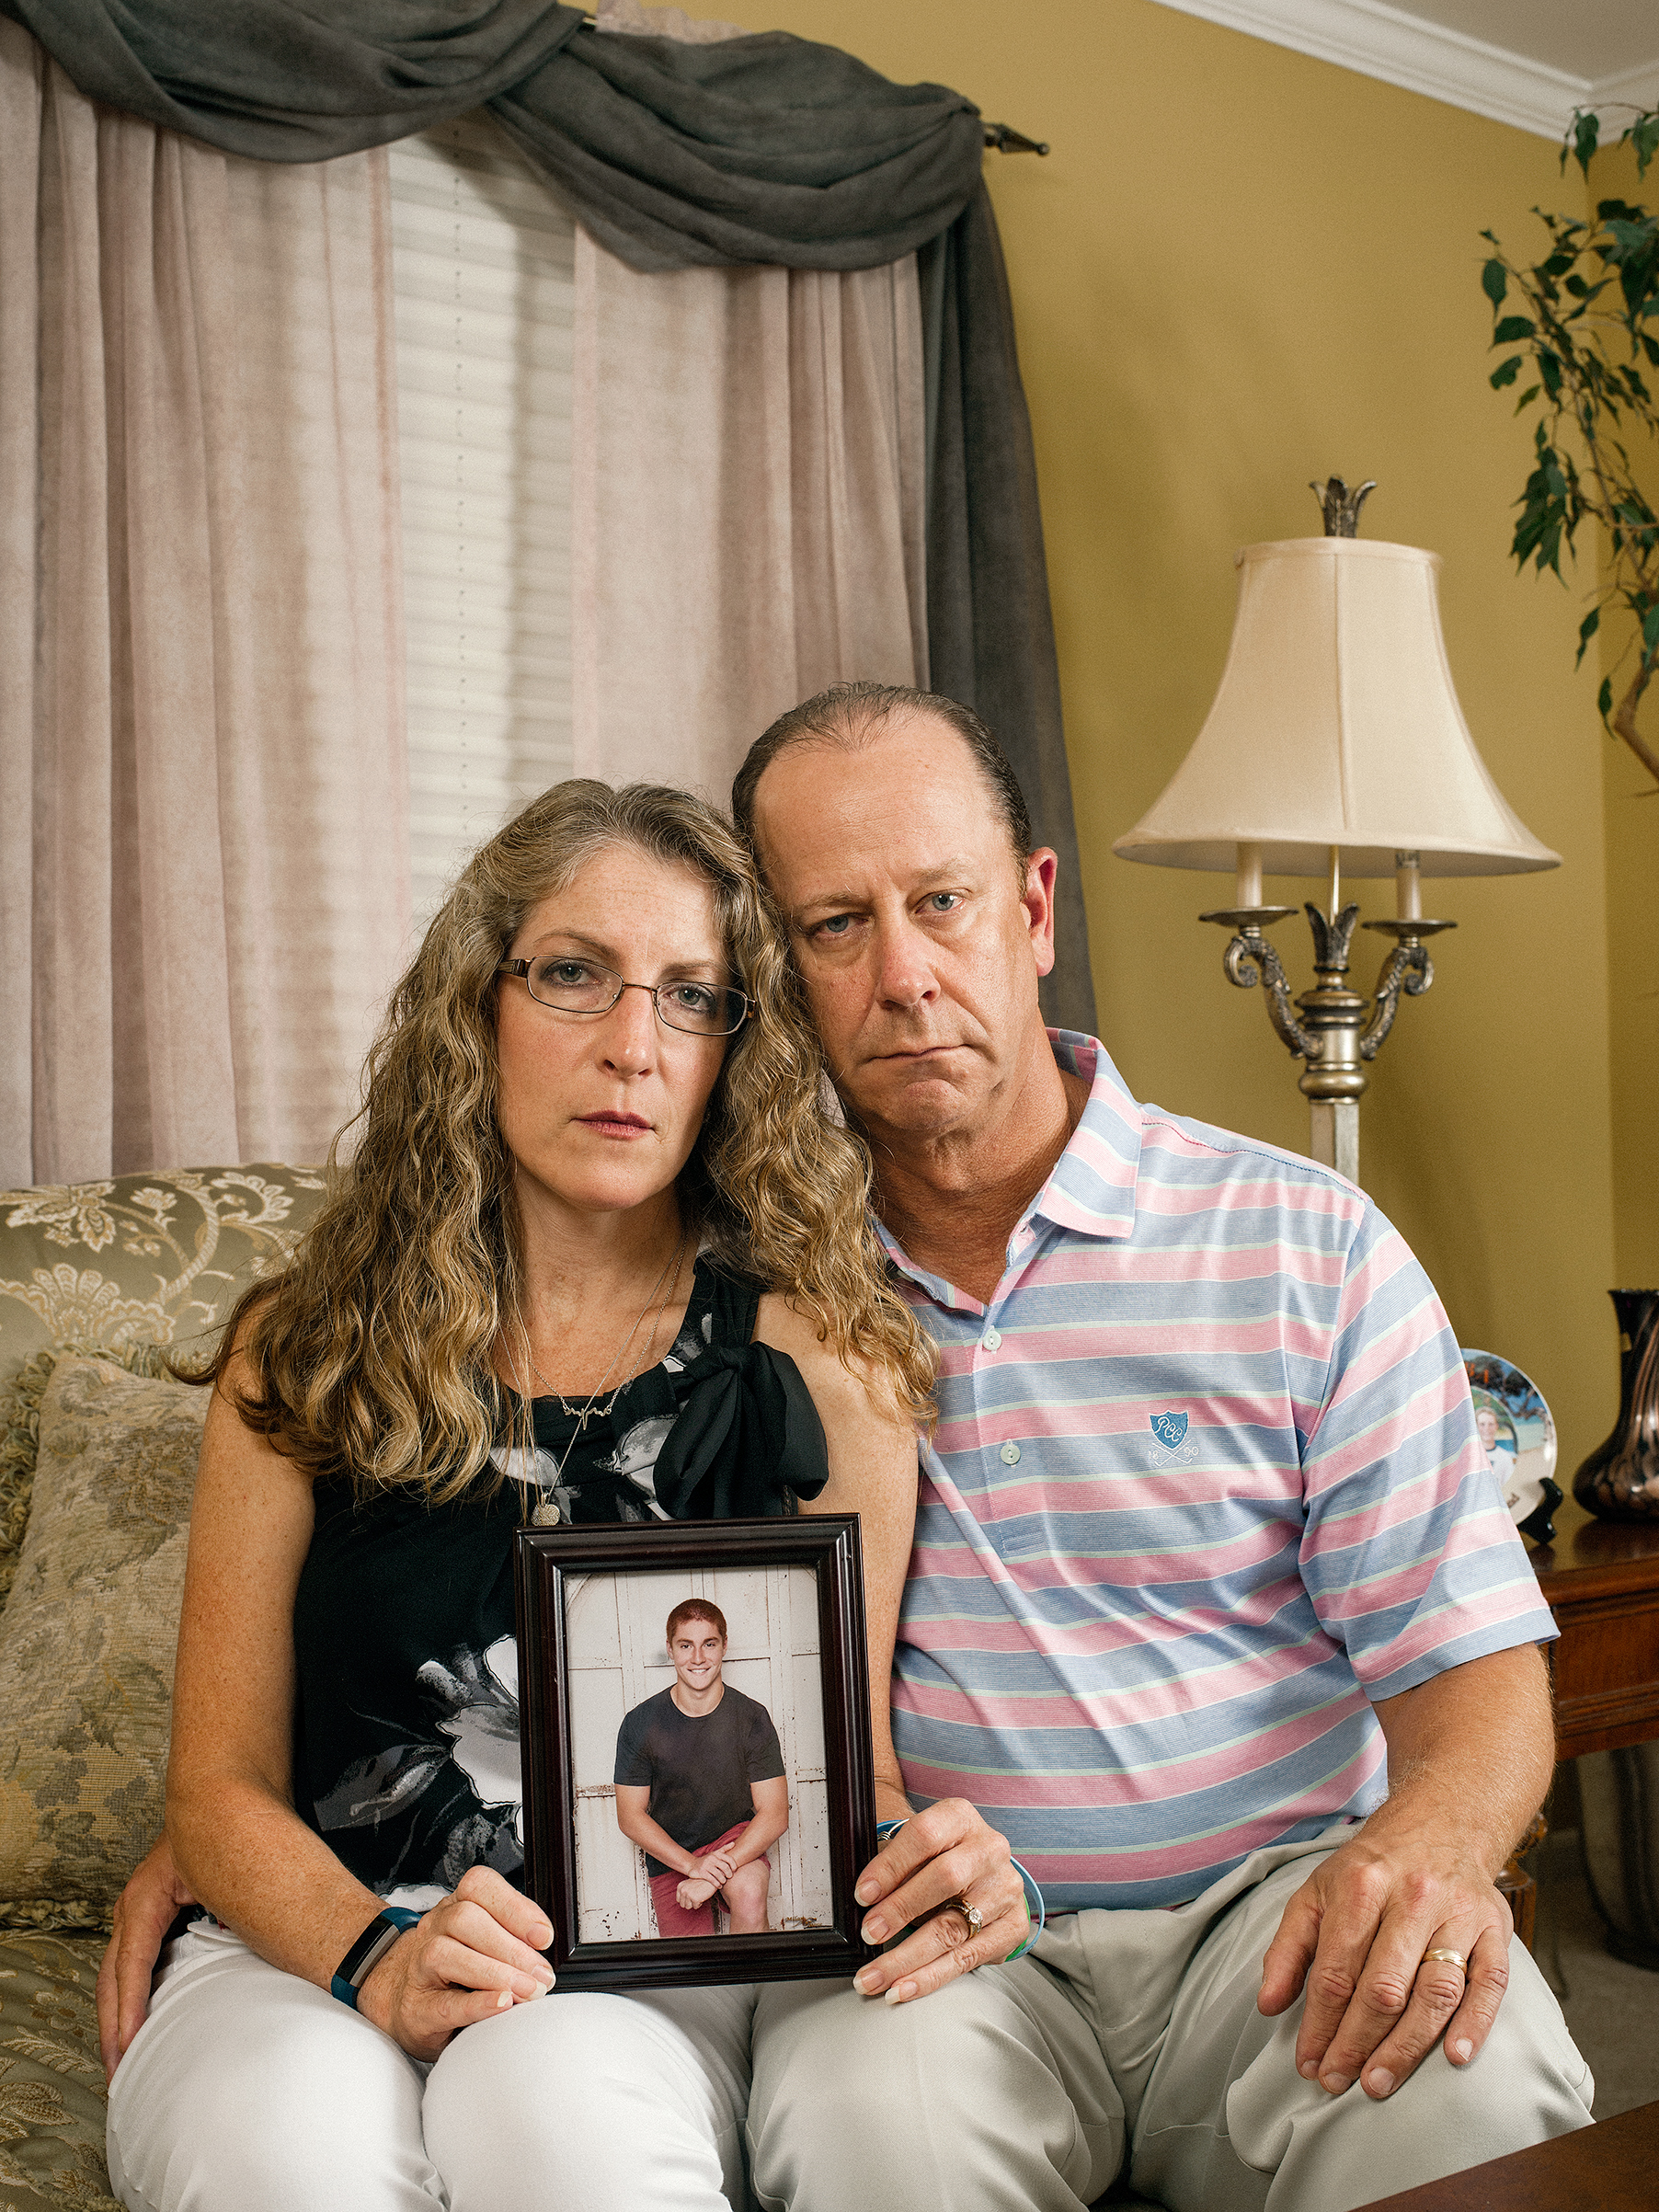 Evelyn and Jim Piazza with a photo of their son Tim, who died in February after a fraternity hazing ritual at Penn State University (Photograph by Mark Hartman for TIME)